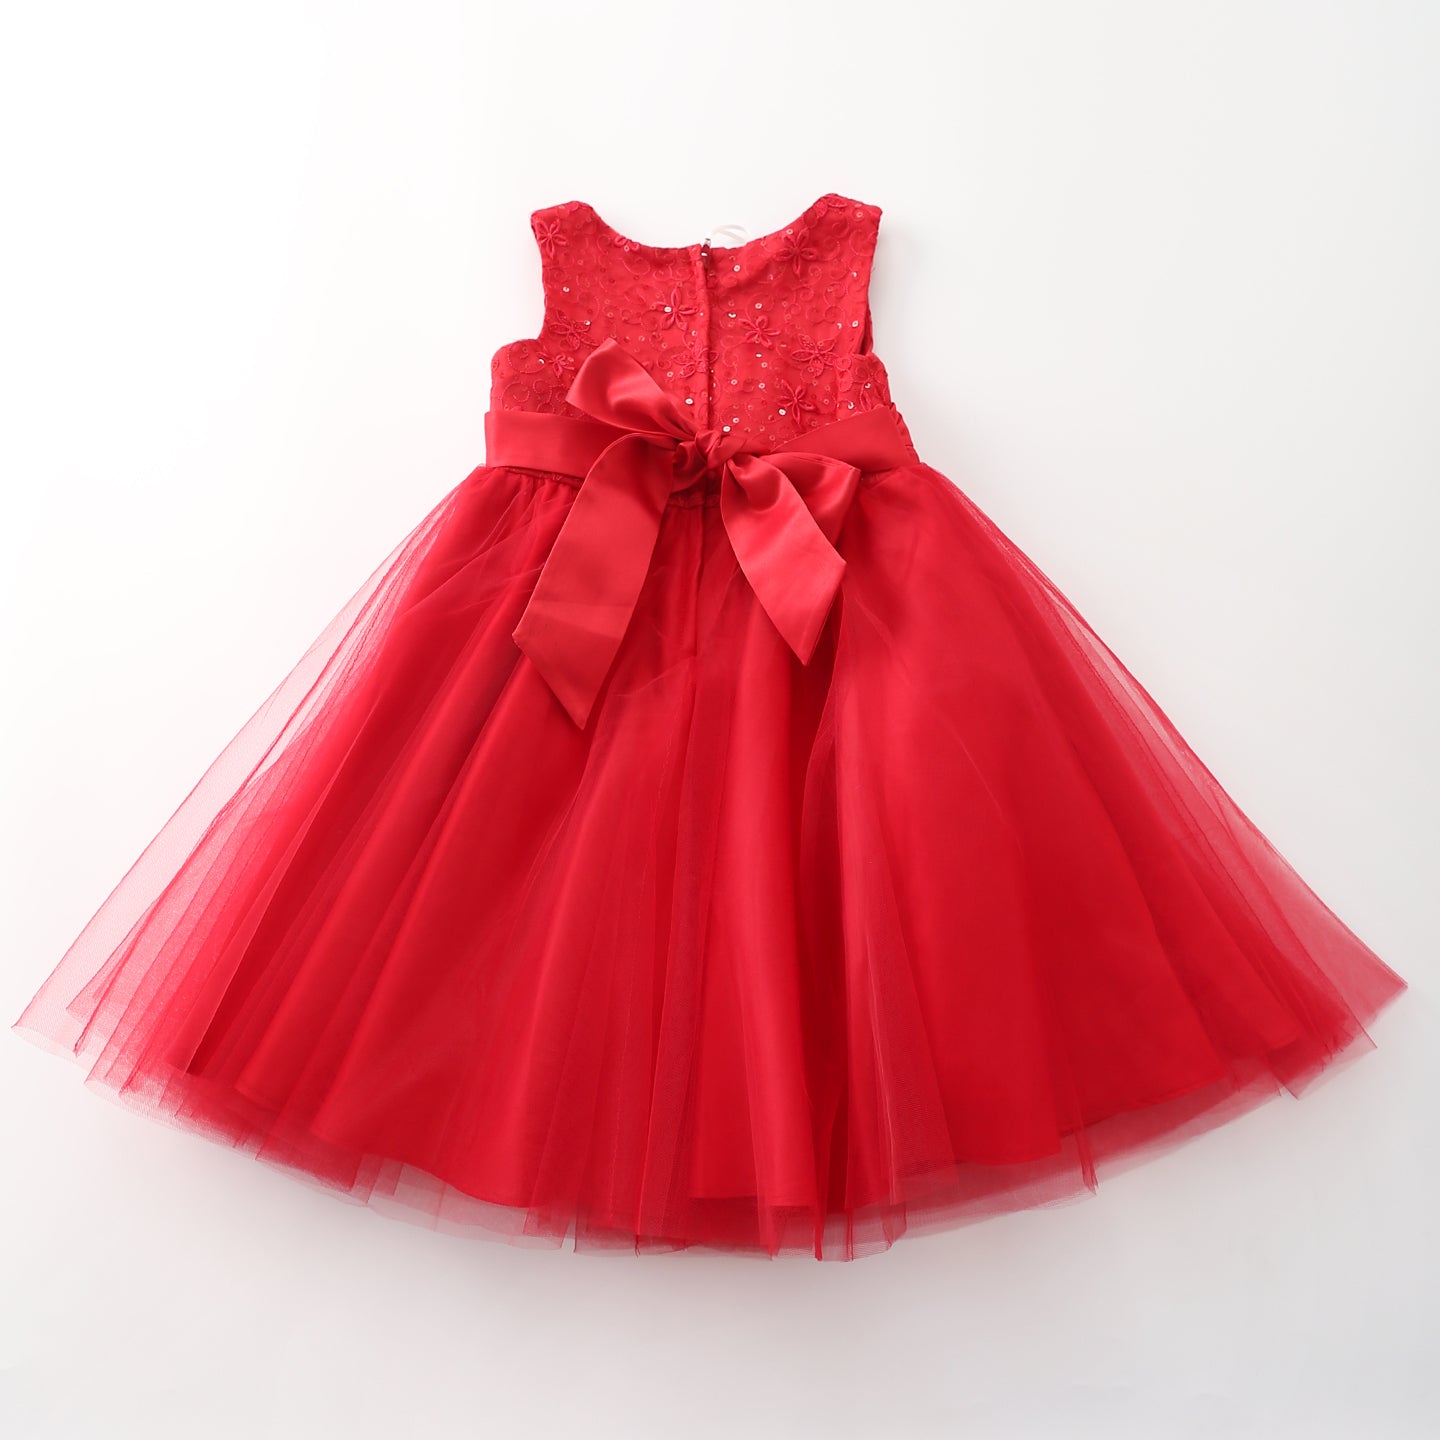 Girls' Formal Event Red Tulle Dress